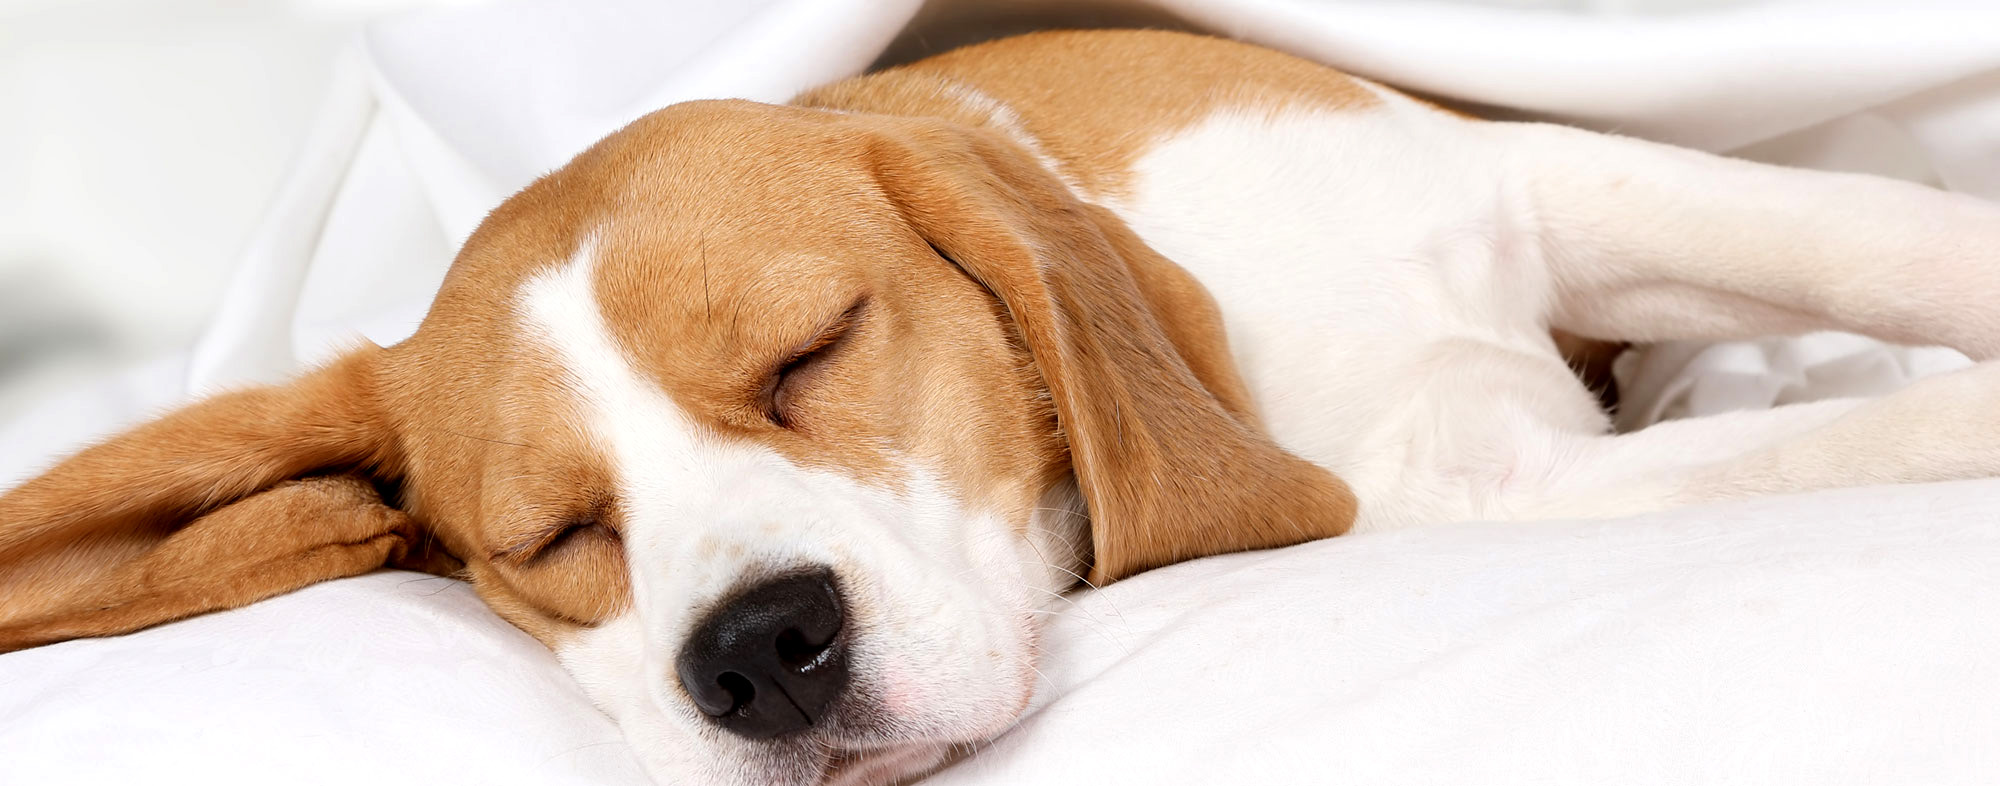 Sleep with your pet? How that may affect you (and your pet)